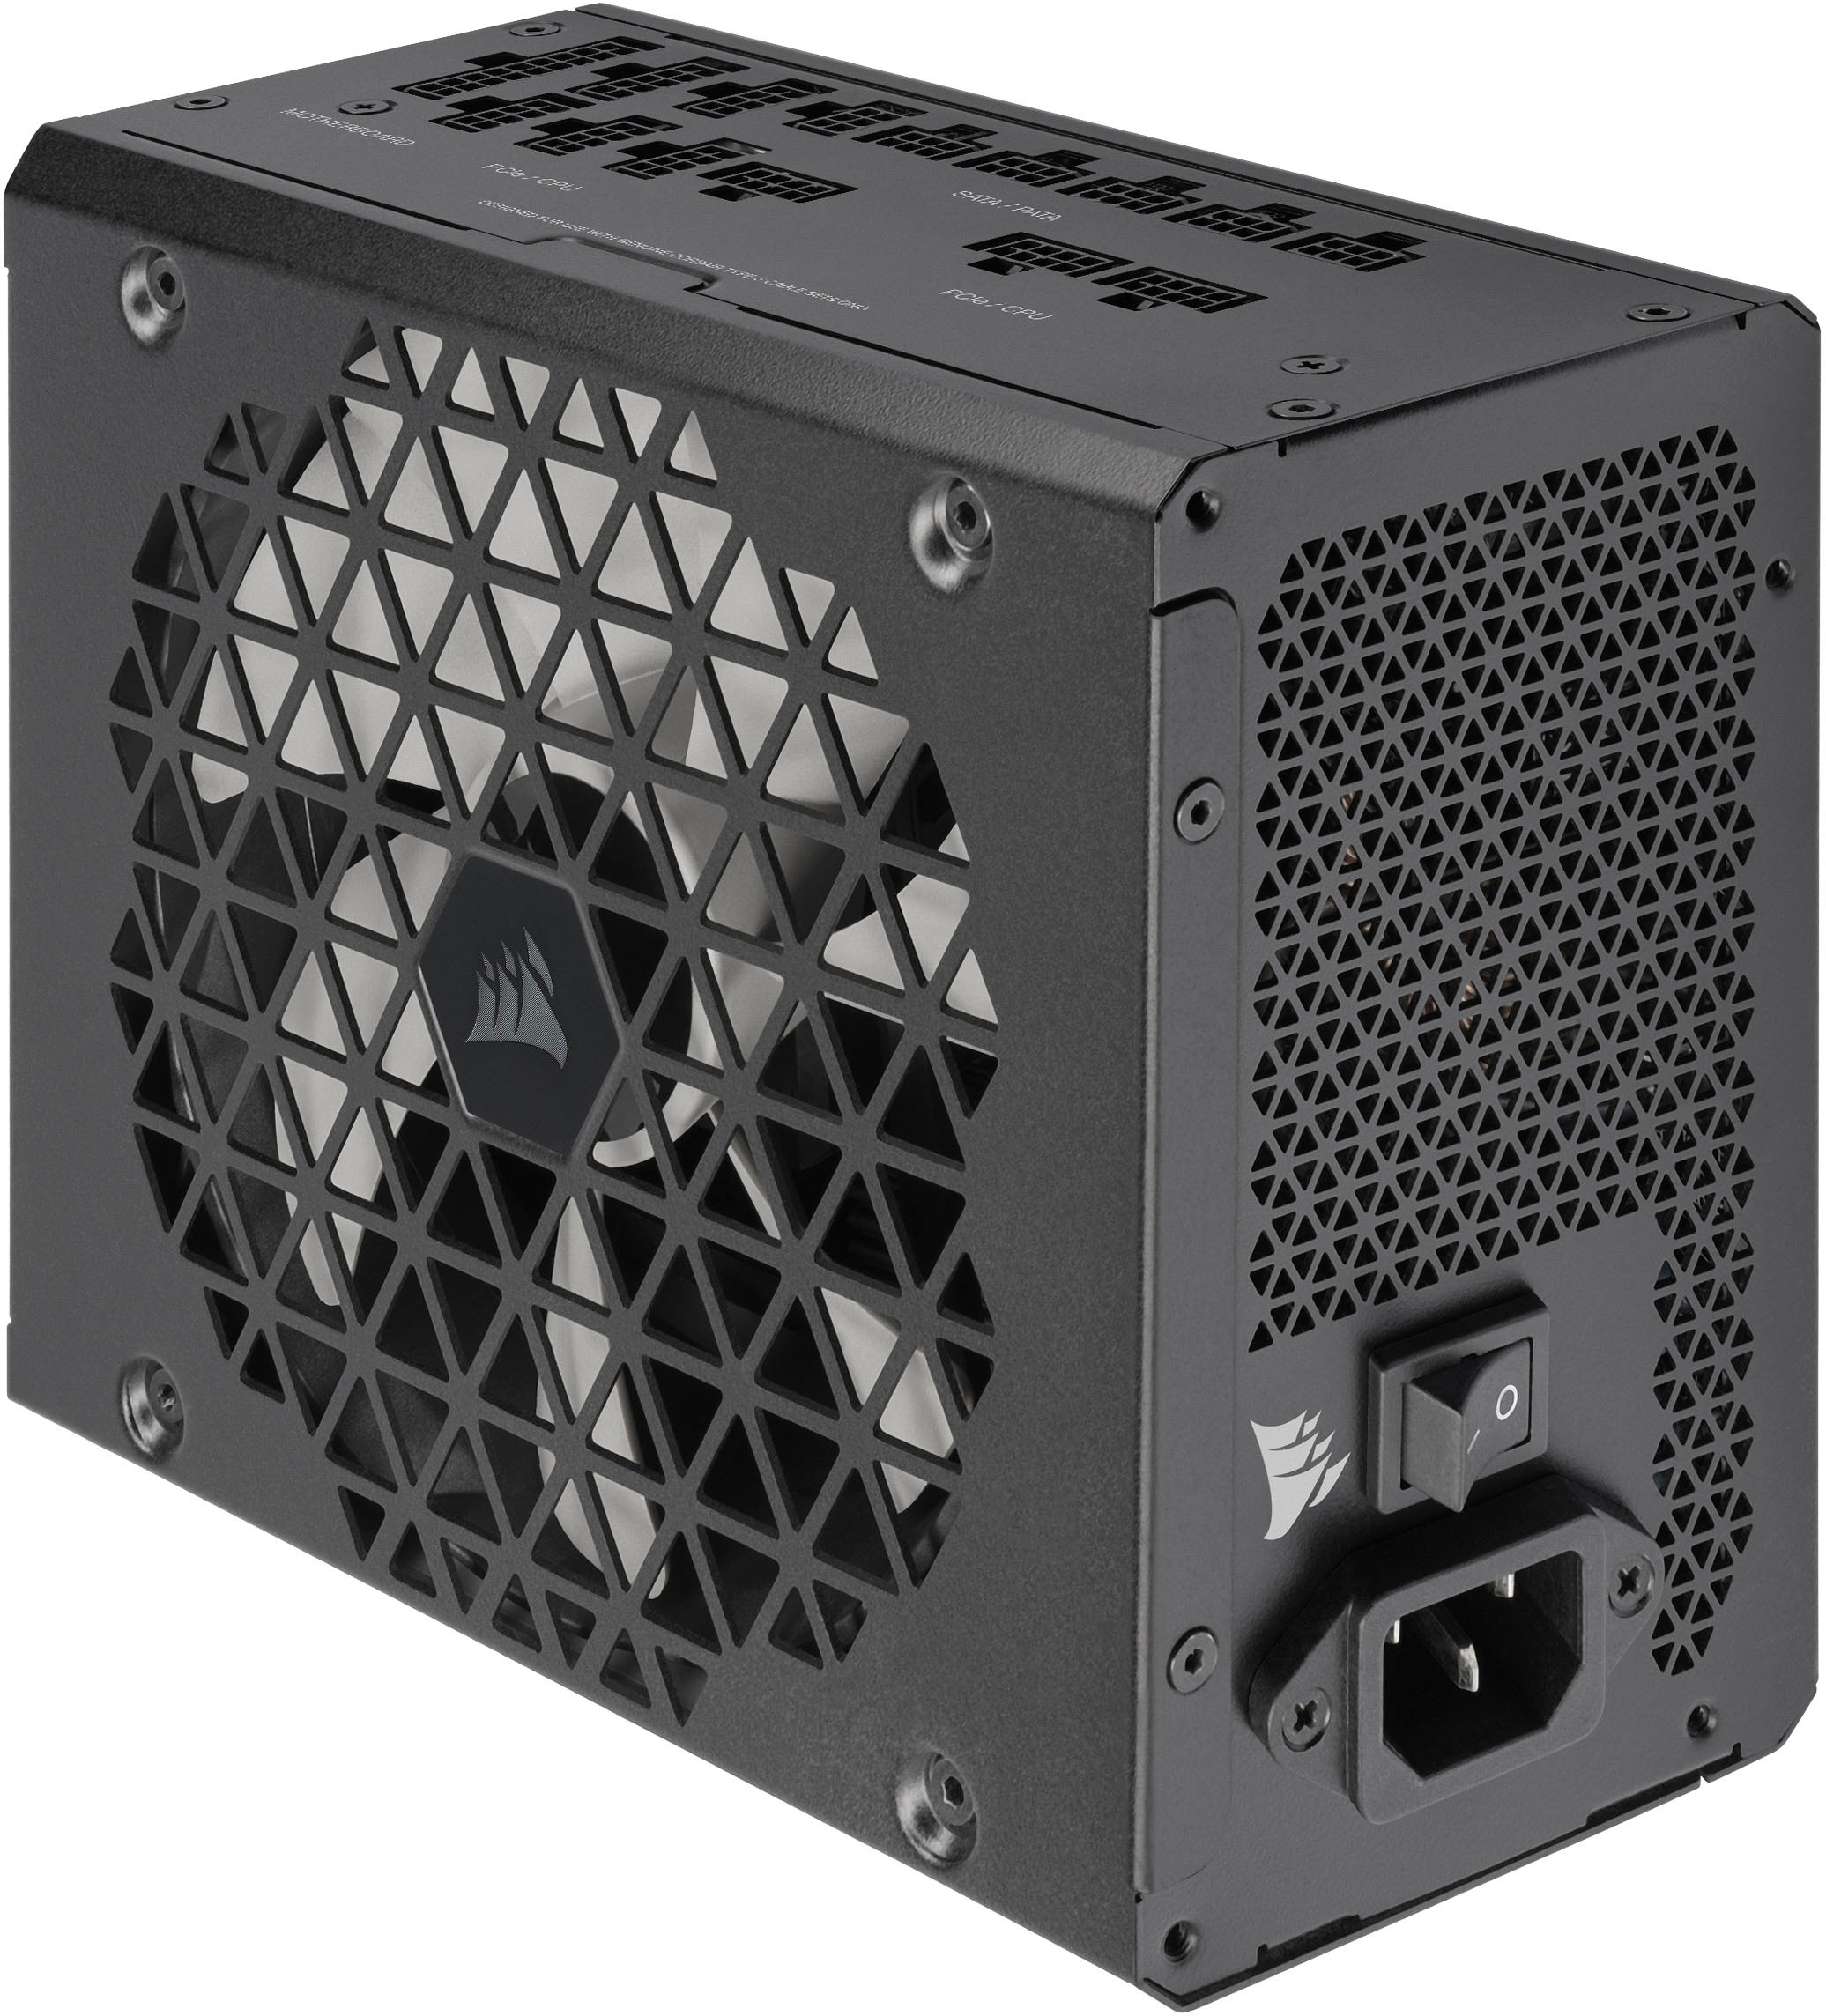 be Quiet! Straight Power 11 1000W, Fully Modular, 80 Plus Gold, Power Supply